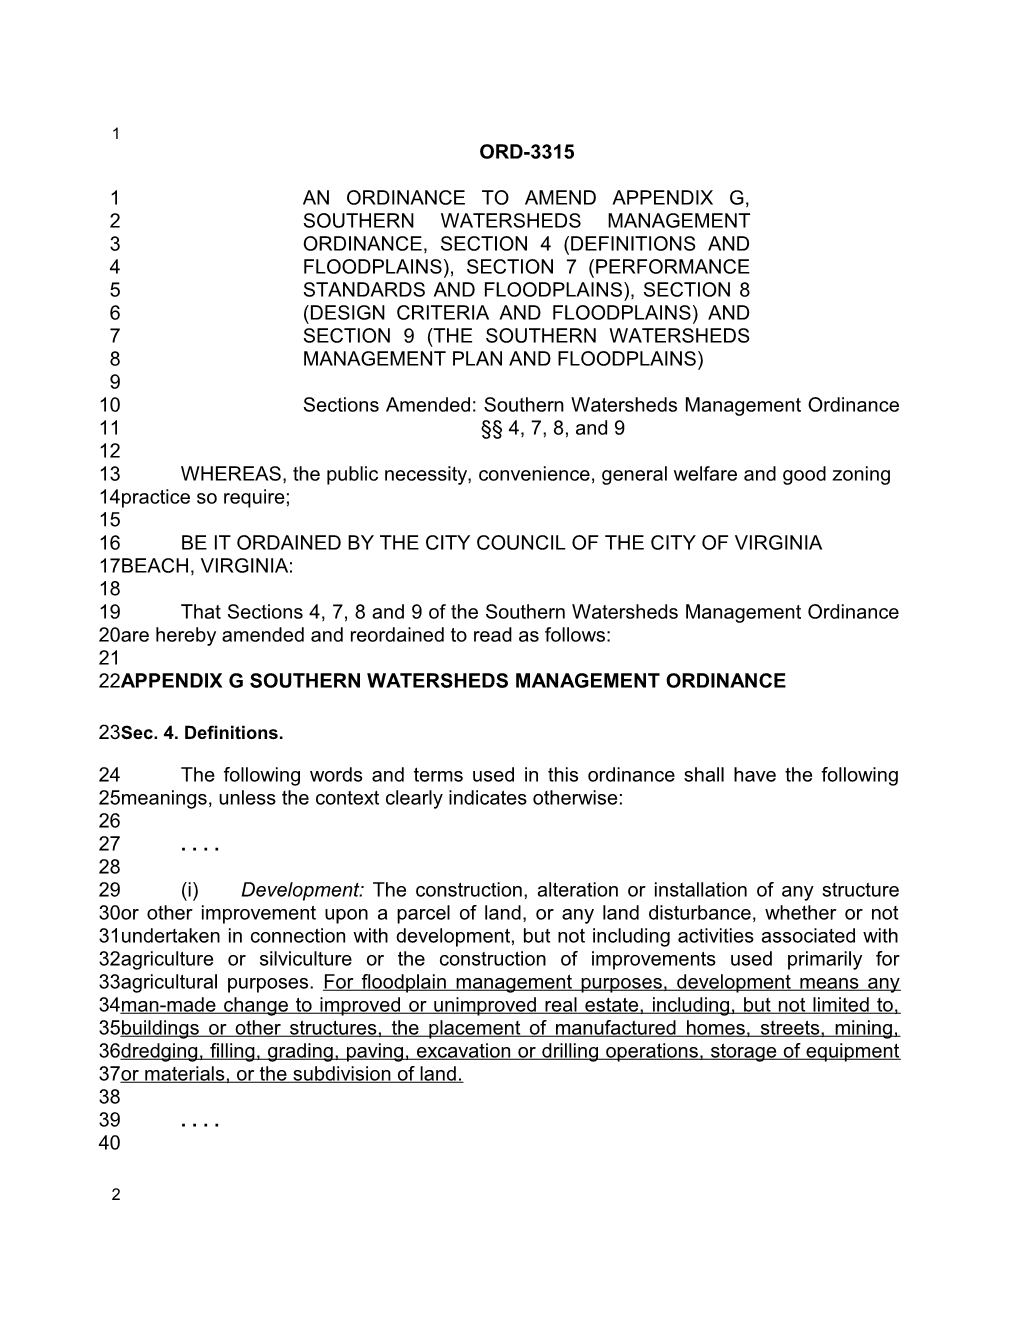 An Ordinance to Amend Section 105 of the City Zoning Ordinance Pertaining to the Replacement